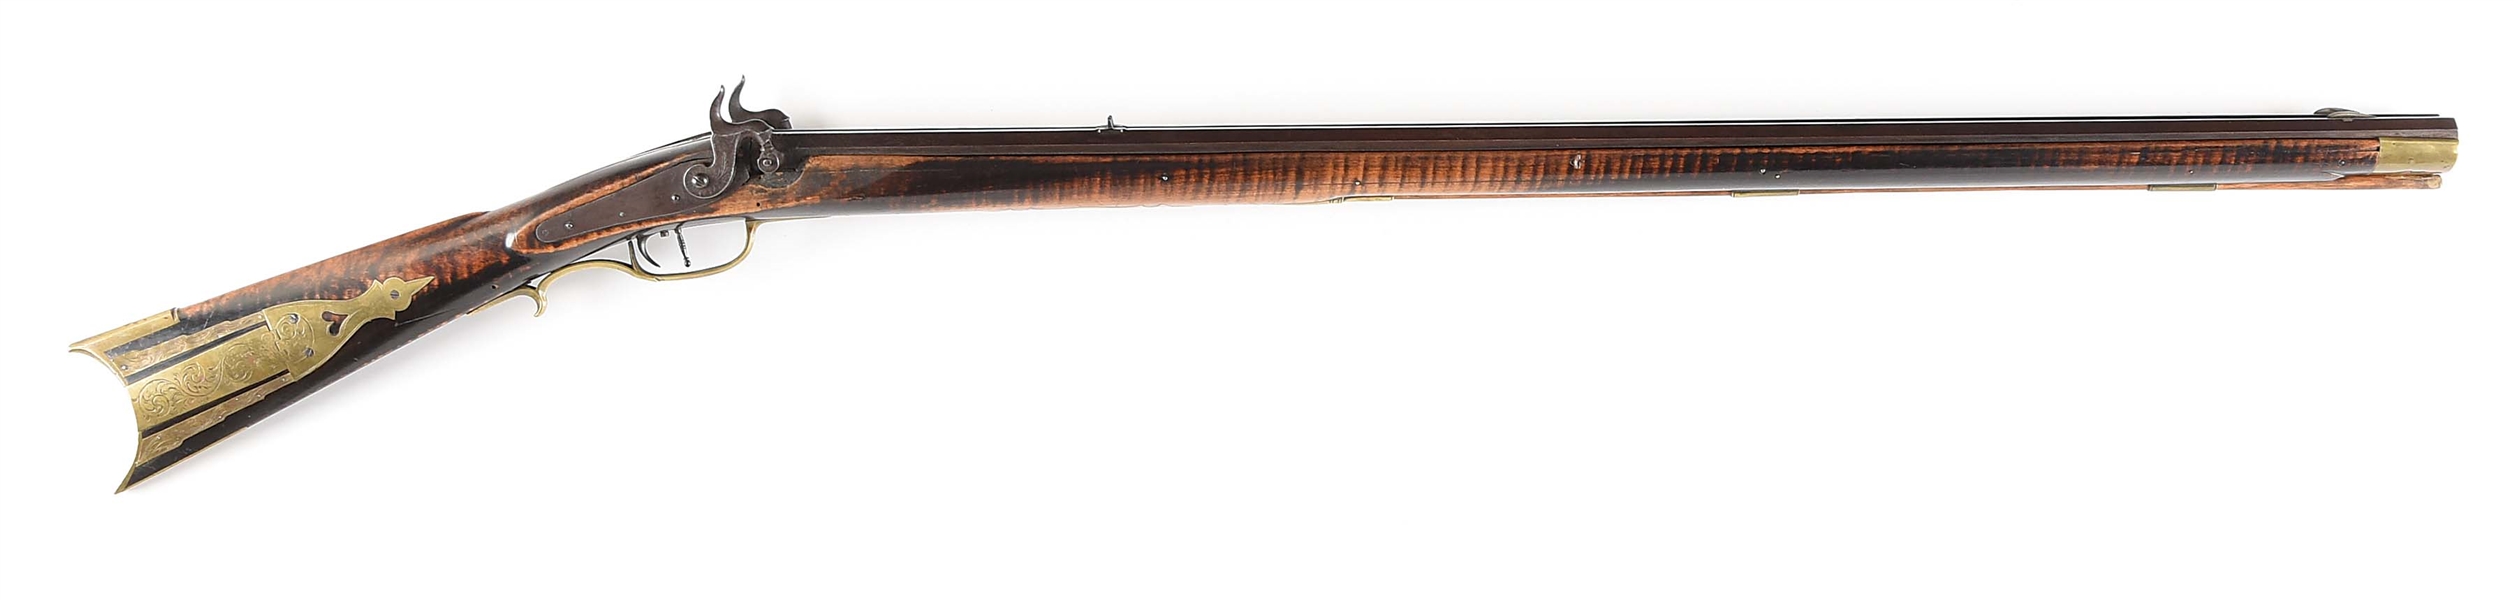 (A) FULL STOCK S. SMITH CASSVILLE DOUBLE BARREL HUNTINGDON KENTUCKY PERCUSSION RIFLE.